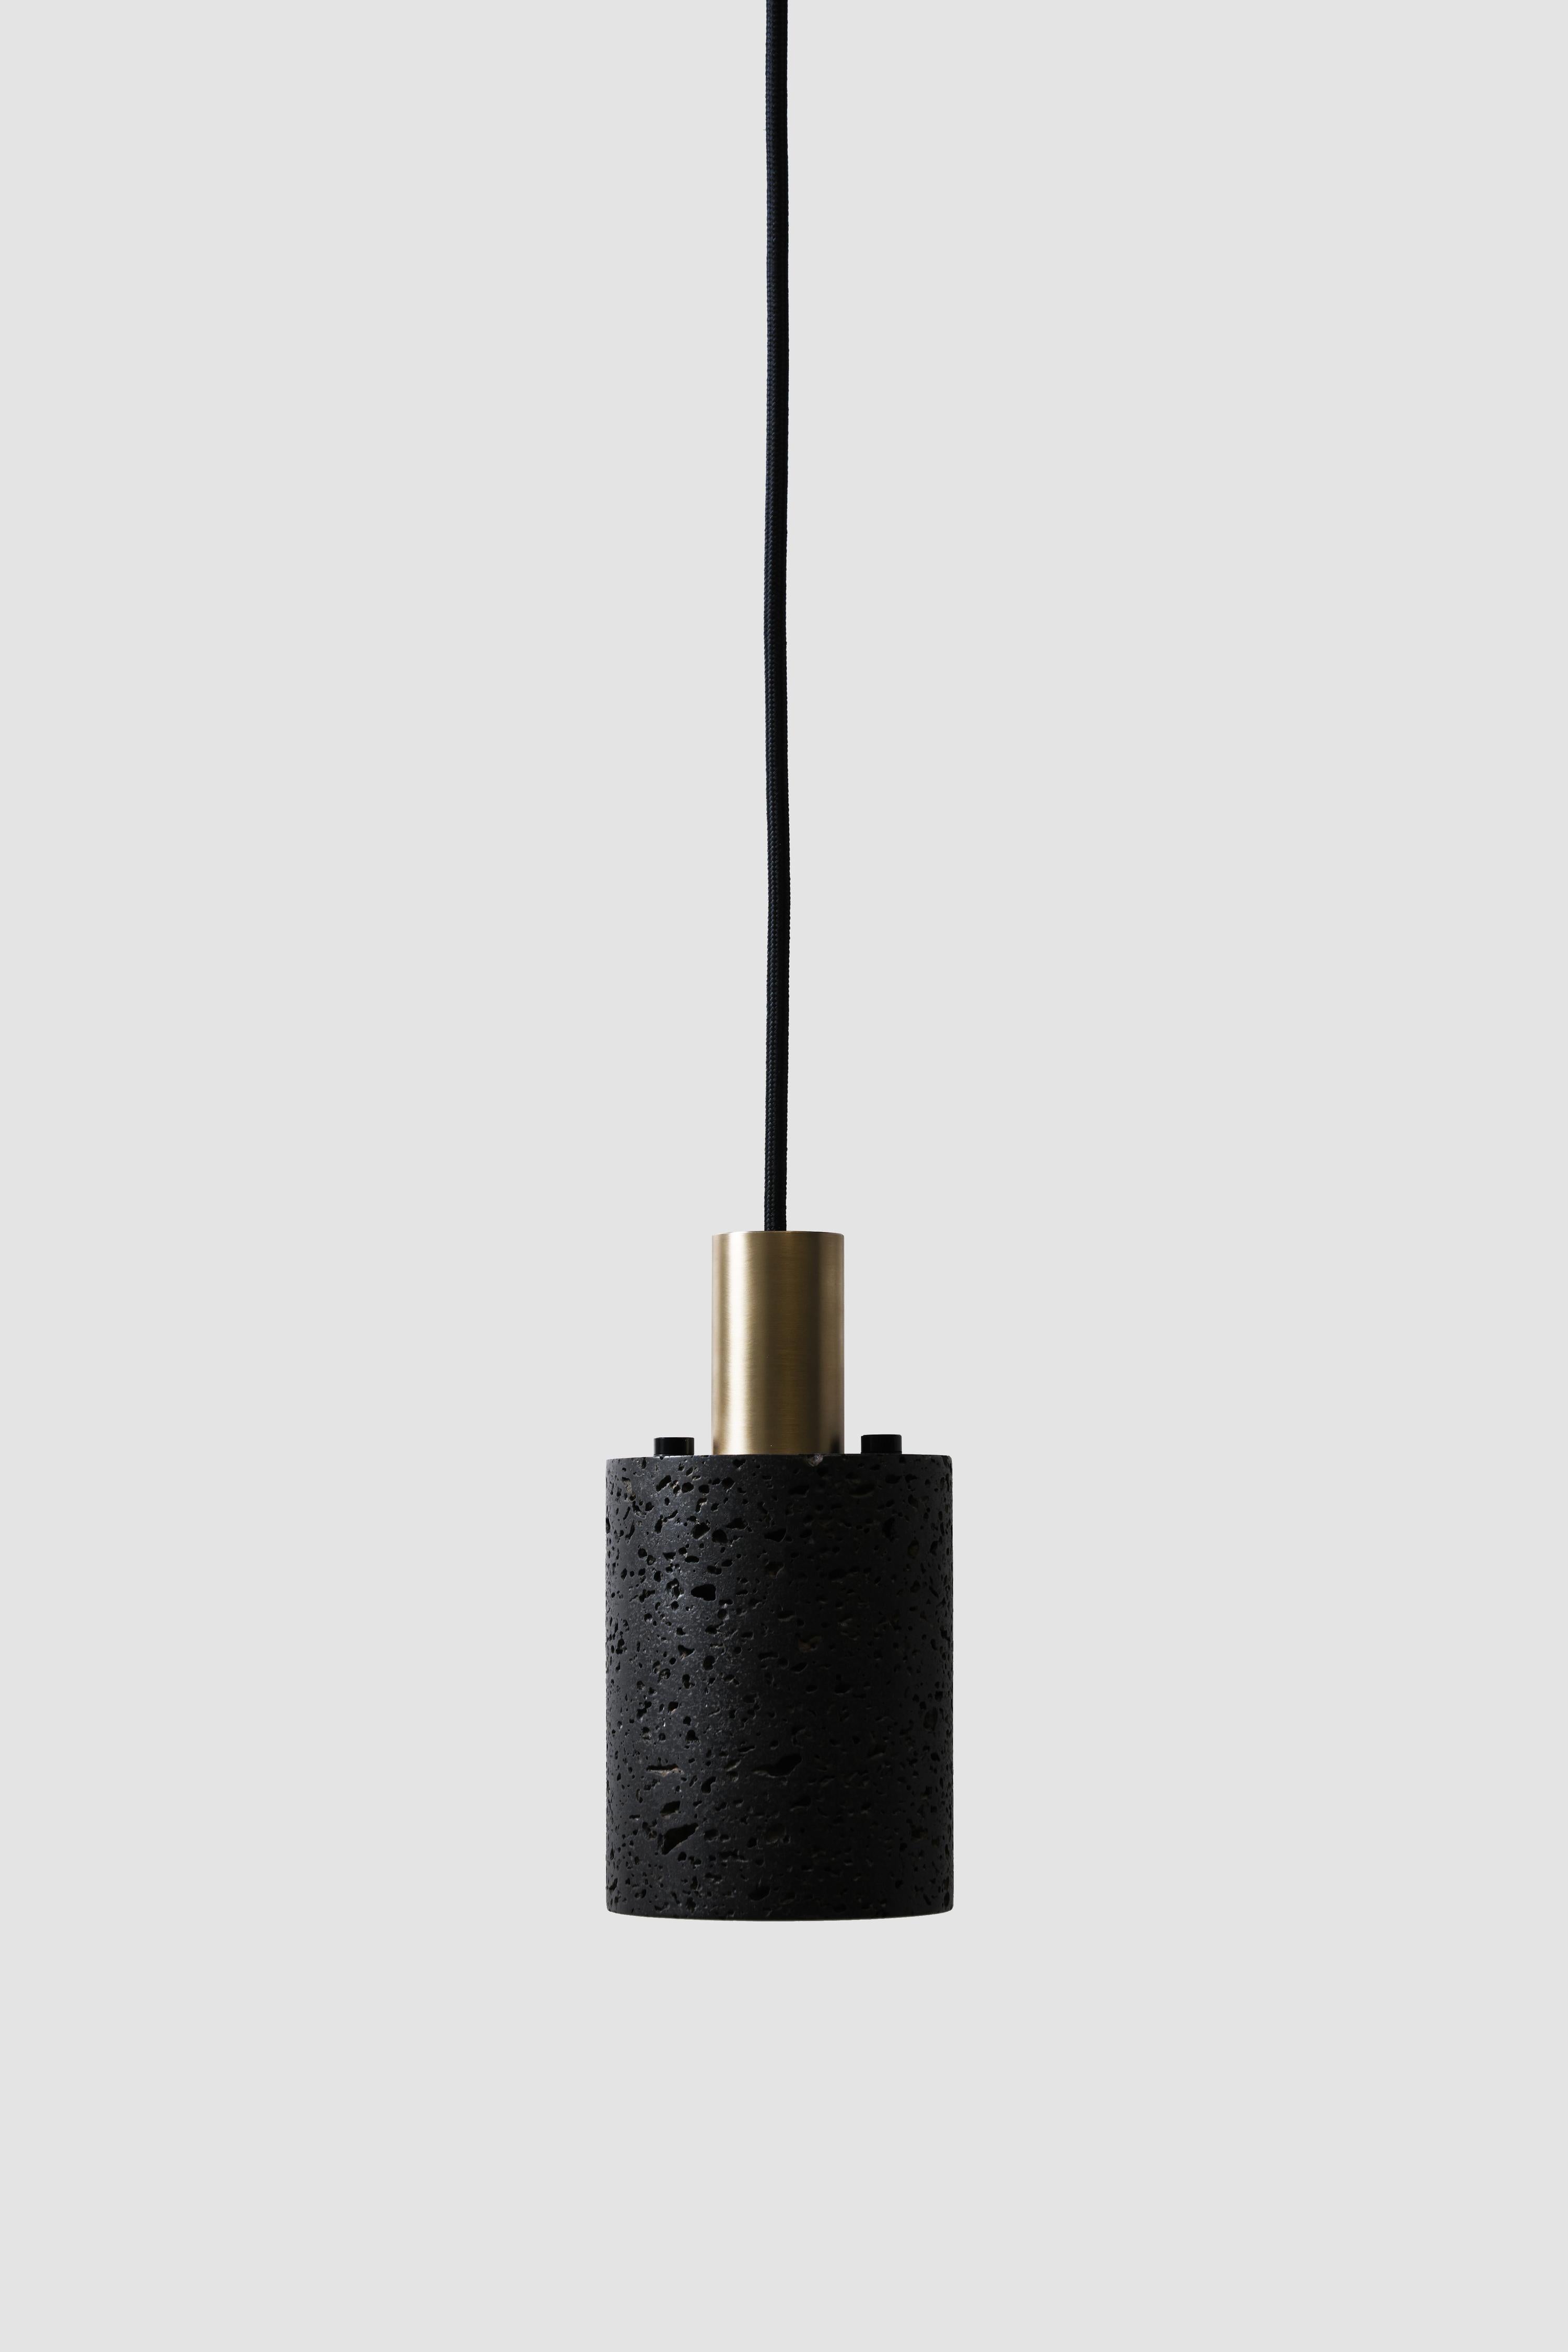 Pendant lamps 'N' by Buzao x Bentu design.

Black lava stone or white marble
Black (aluminum or gold brass) finish

(Sold individually)

19.5 cm high, 10 cm diameter
Wire: 2 meters black (adjustable) 

Lamp type: E27 LED 3W 100-240V 80Ra 200LM